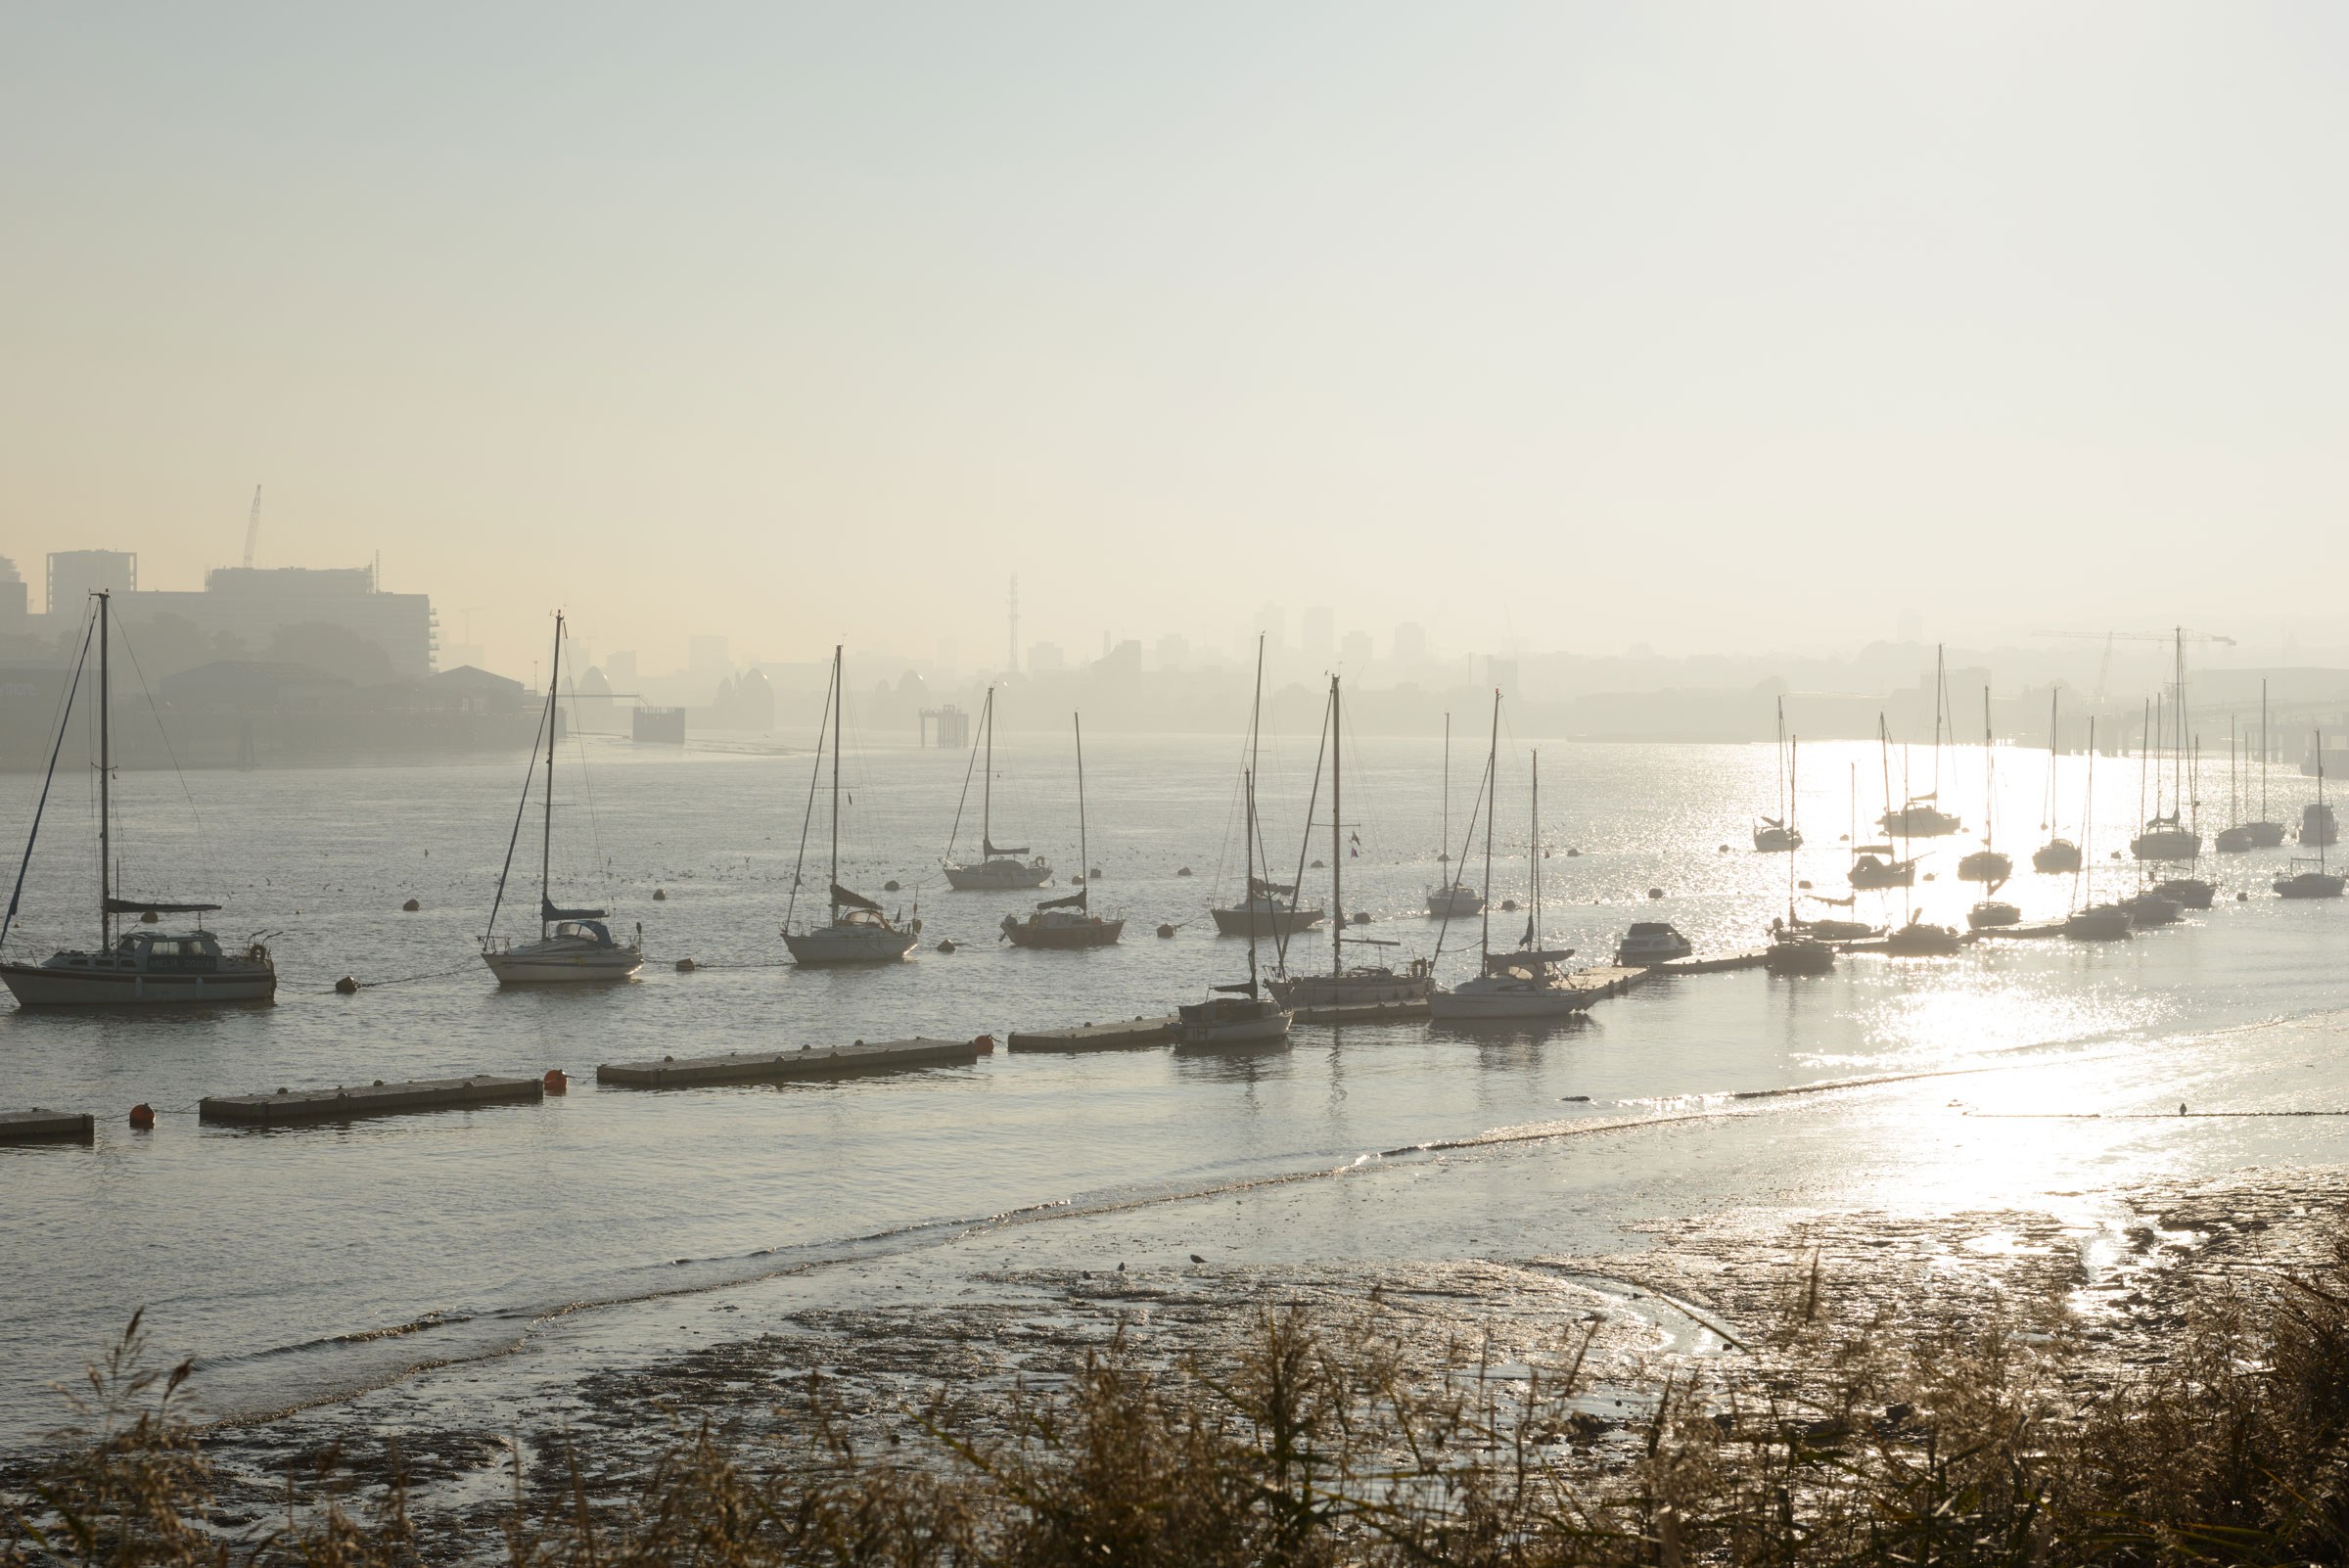 Boats in the Thames off the Royal Docks in hazy sun